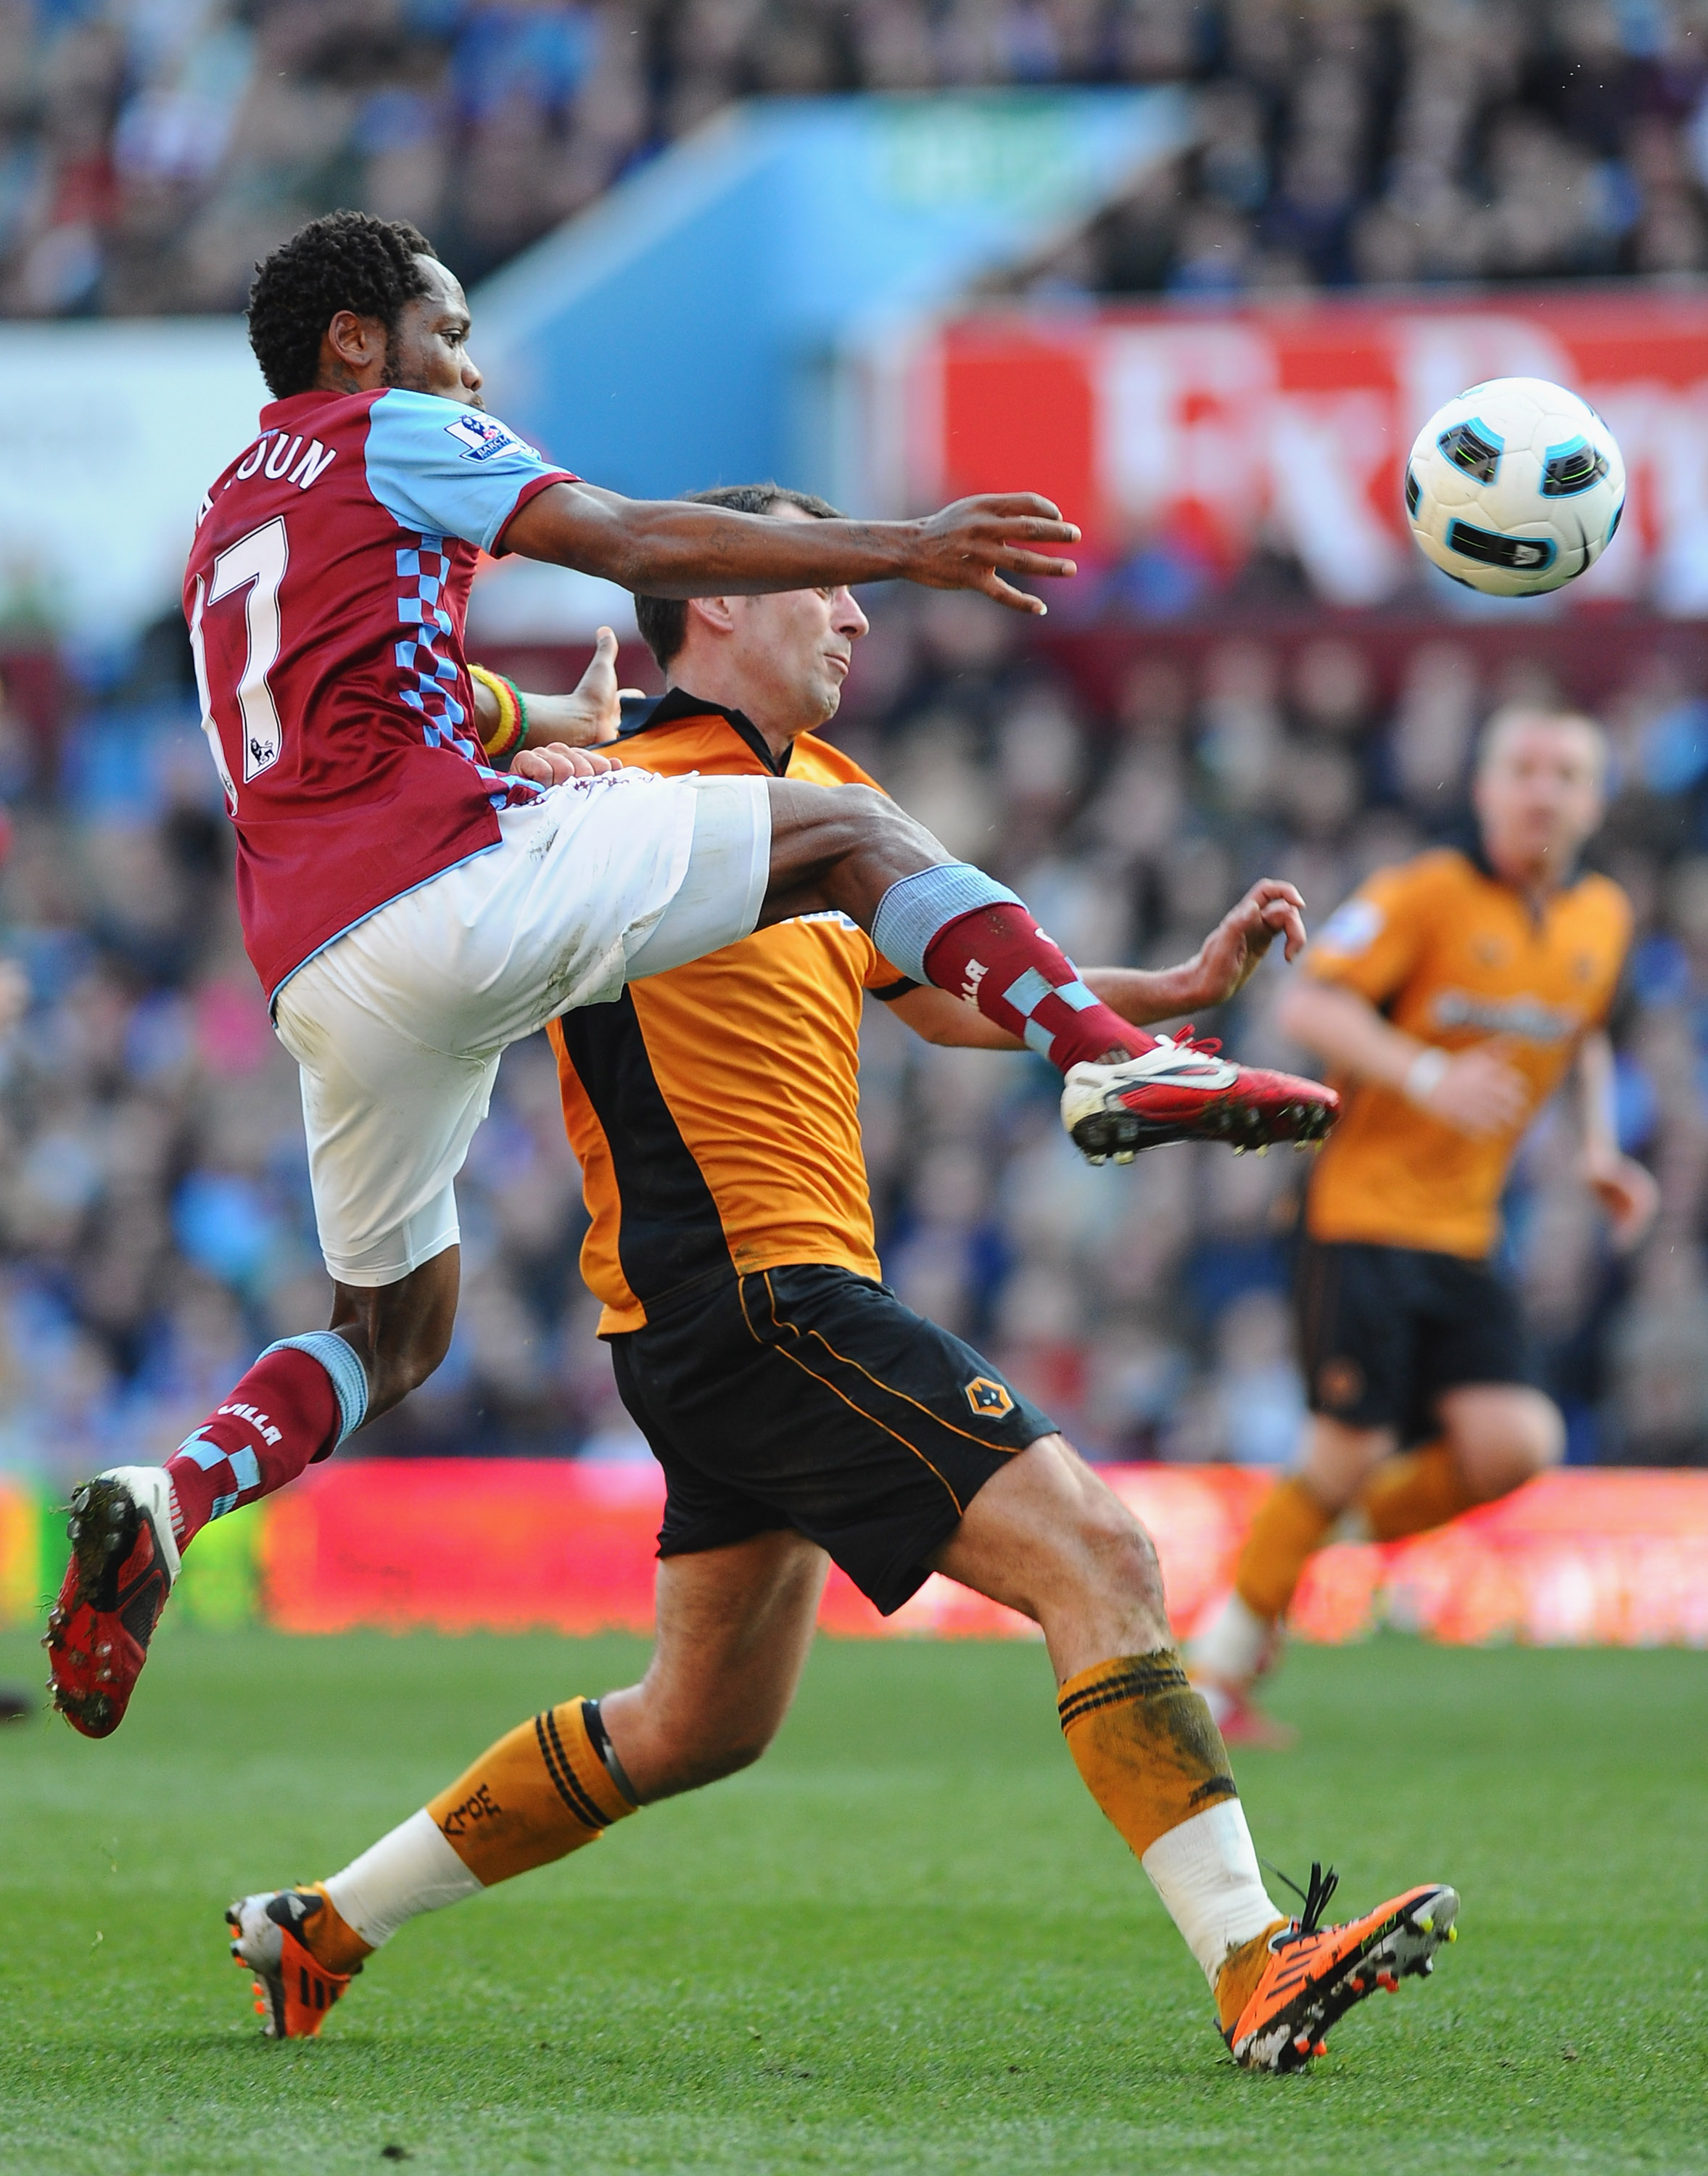 BIRMINGHAM, ENGLAND - MARCH 19:  Jean Makoun (L) of Aston Villa challenges Nenad Milijas of Wolves during the Barclays Premier League match between Aston Villa and Wolverhampton Wanderers at Villa Park on March 19, 2011 in Birmingham, England.  (Photo by